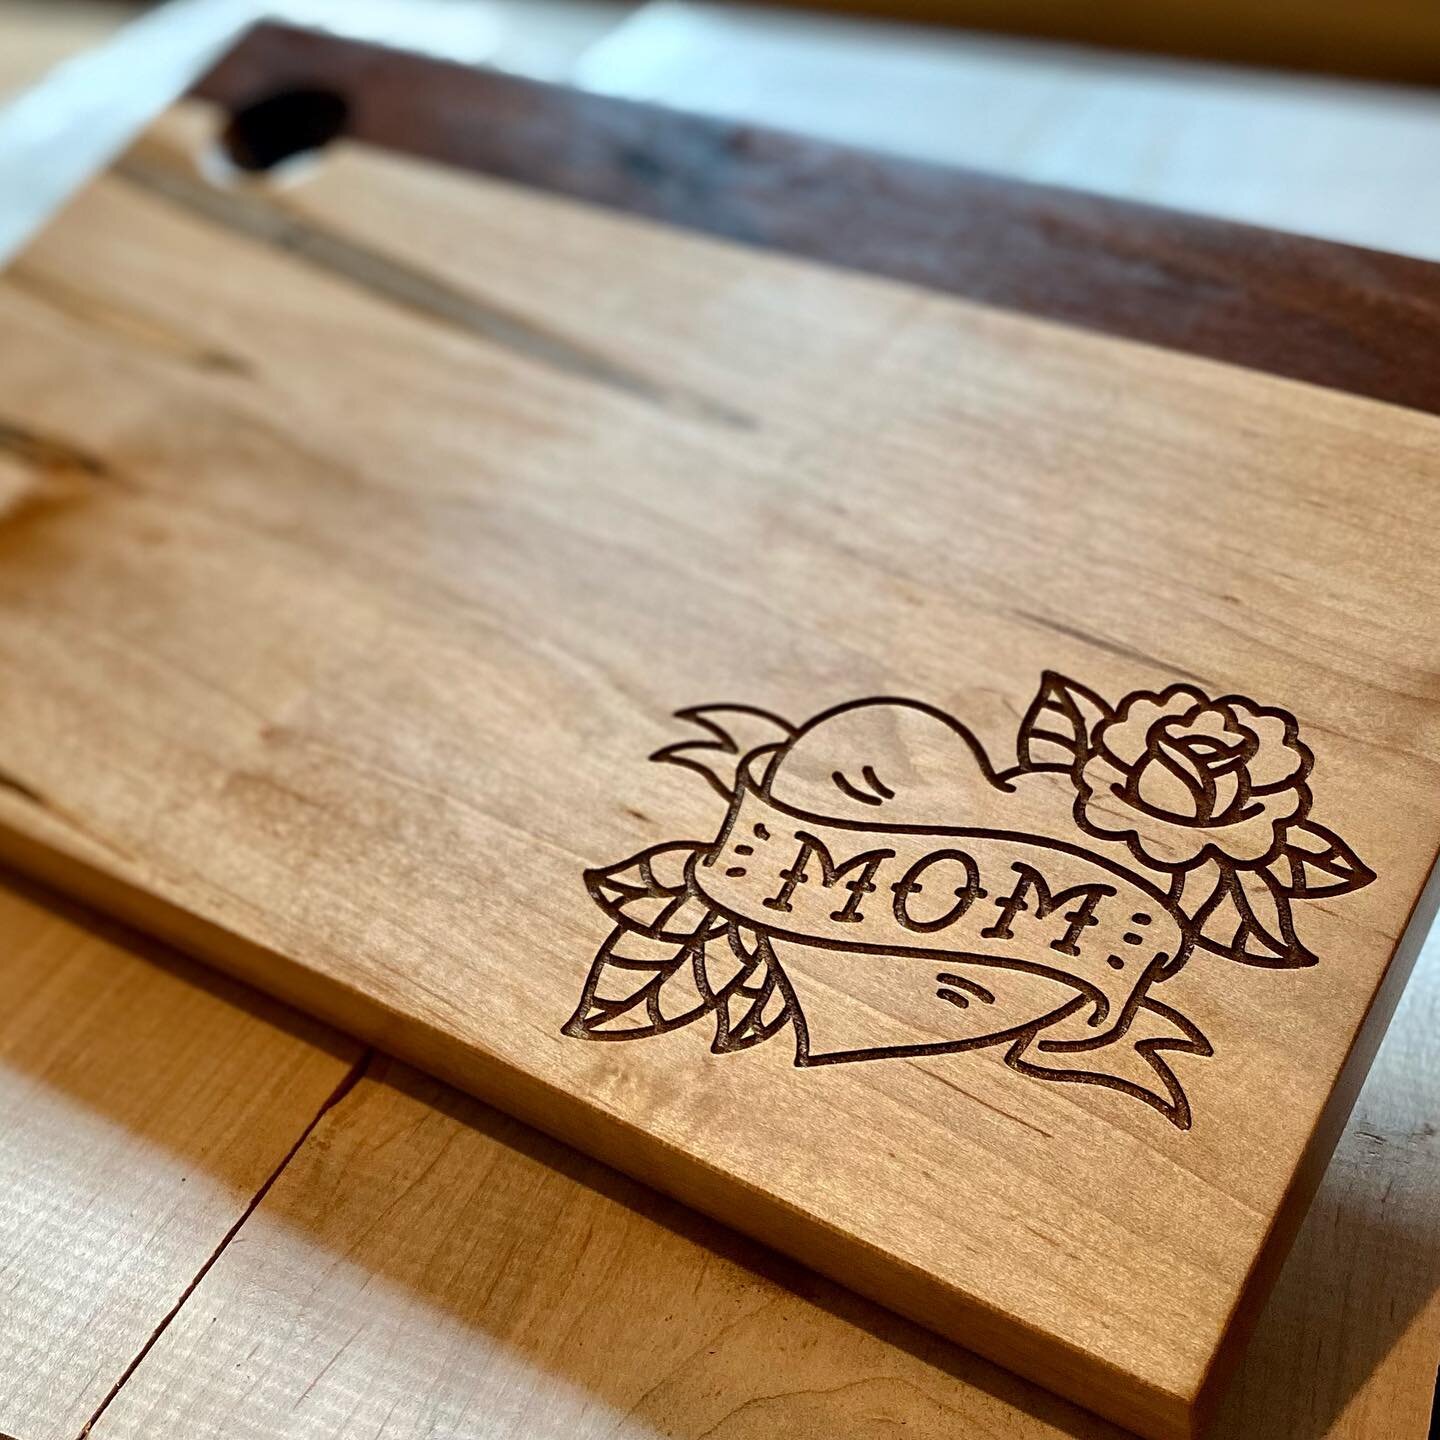 How to become the favorite child&hellip;.

Step 1: Call your Mom and tell her you love her. She would probably love to hear from you. 

Step 2: Surprise her with one of these bad boys. 

FREE laser engraving on all Mother&rsquo;s Day boards. 

Availa